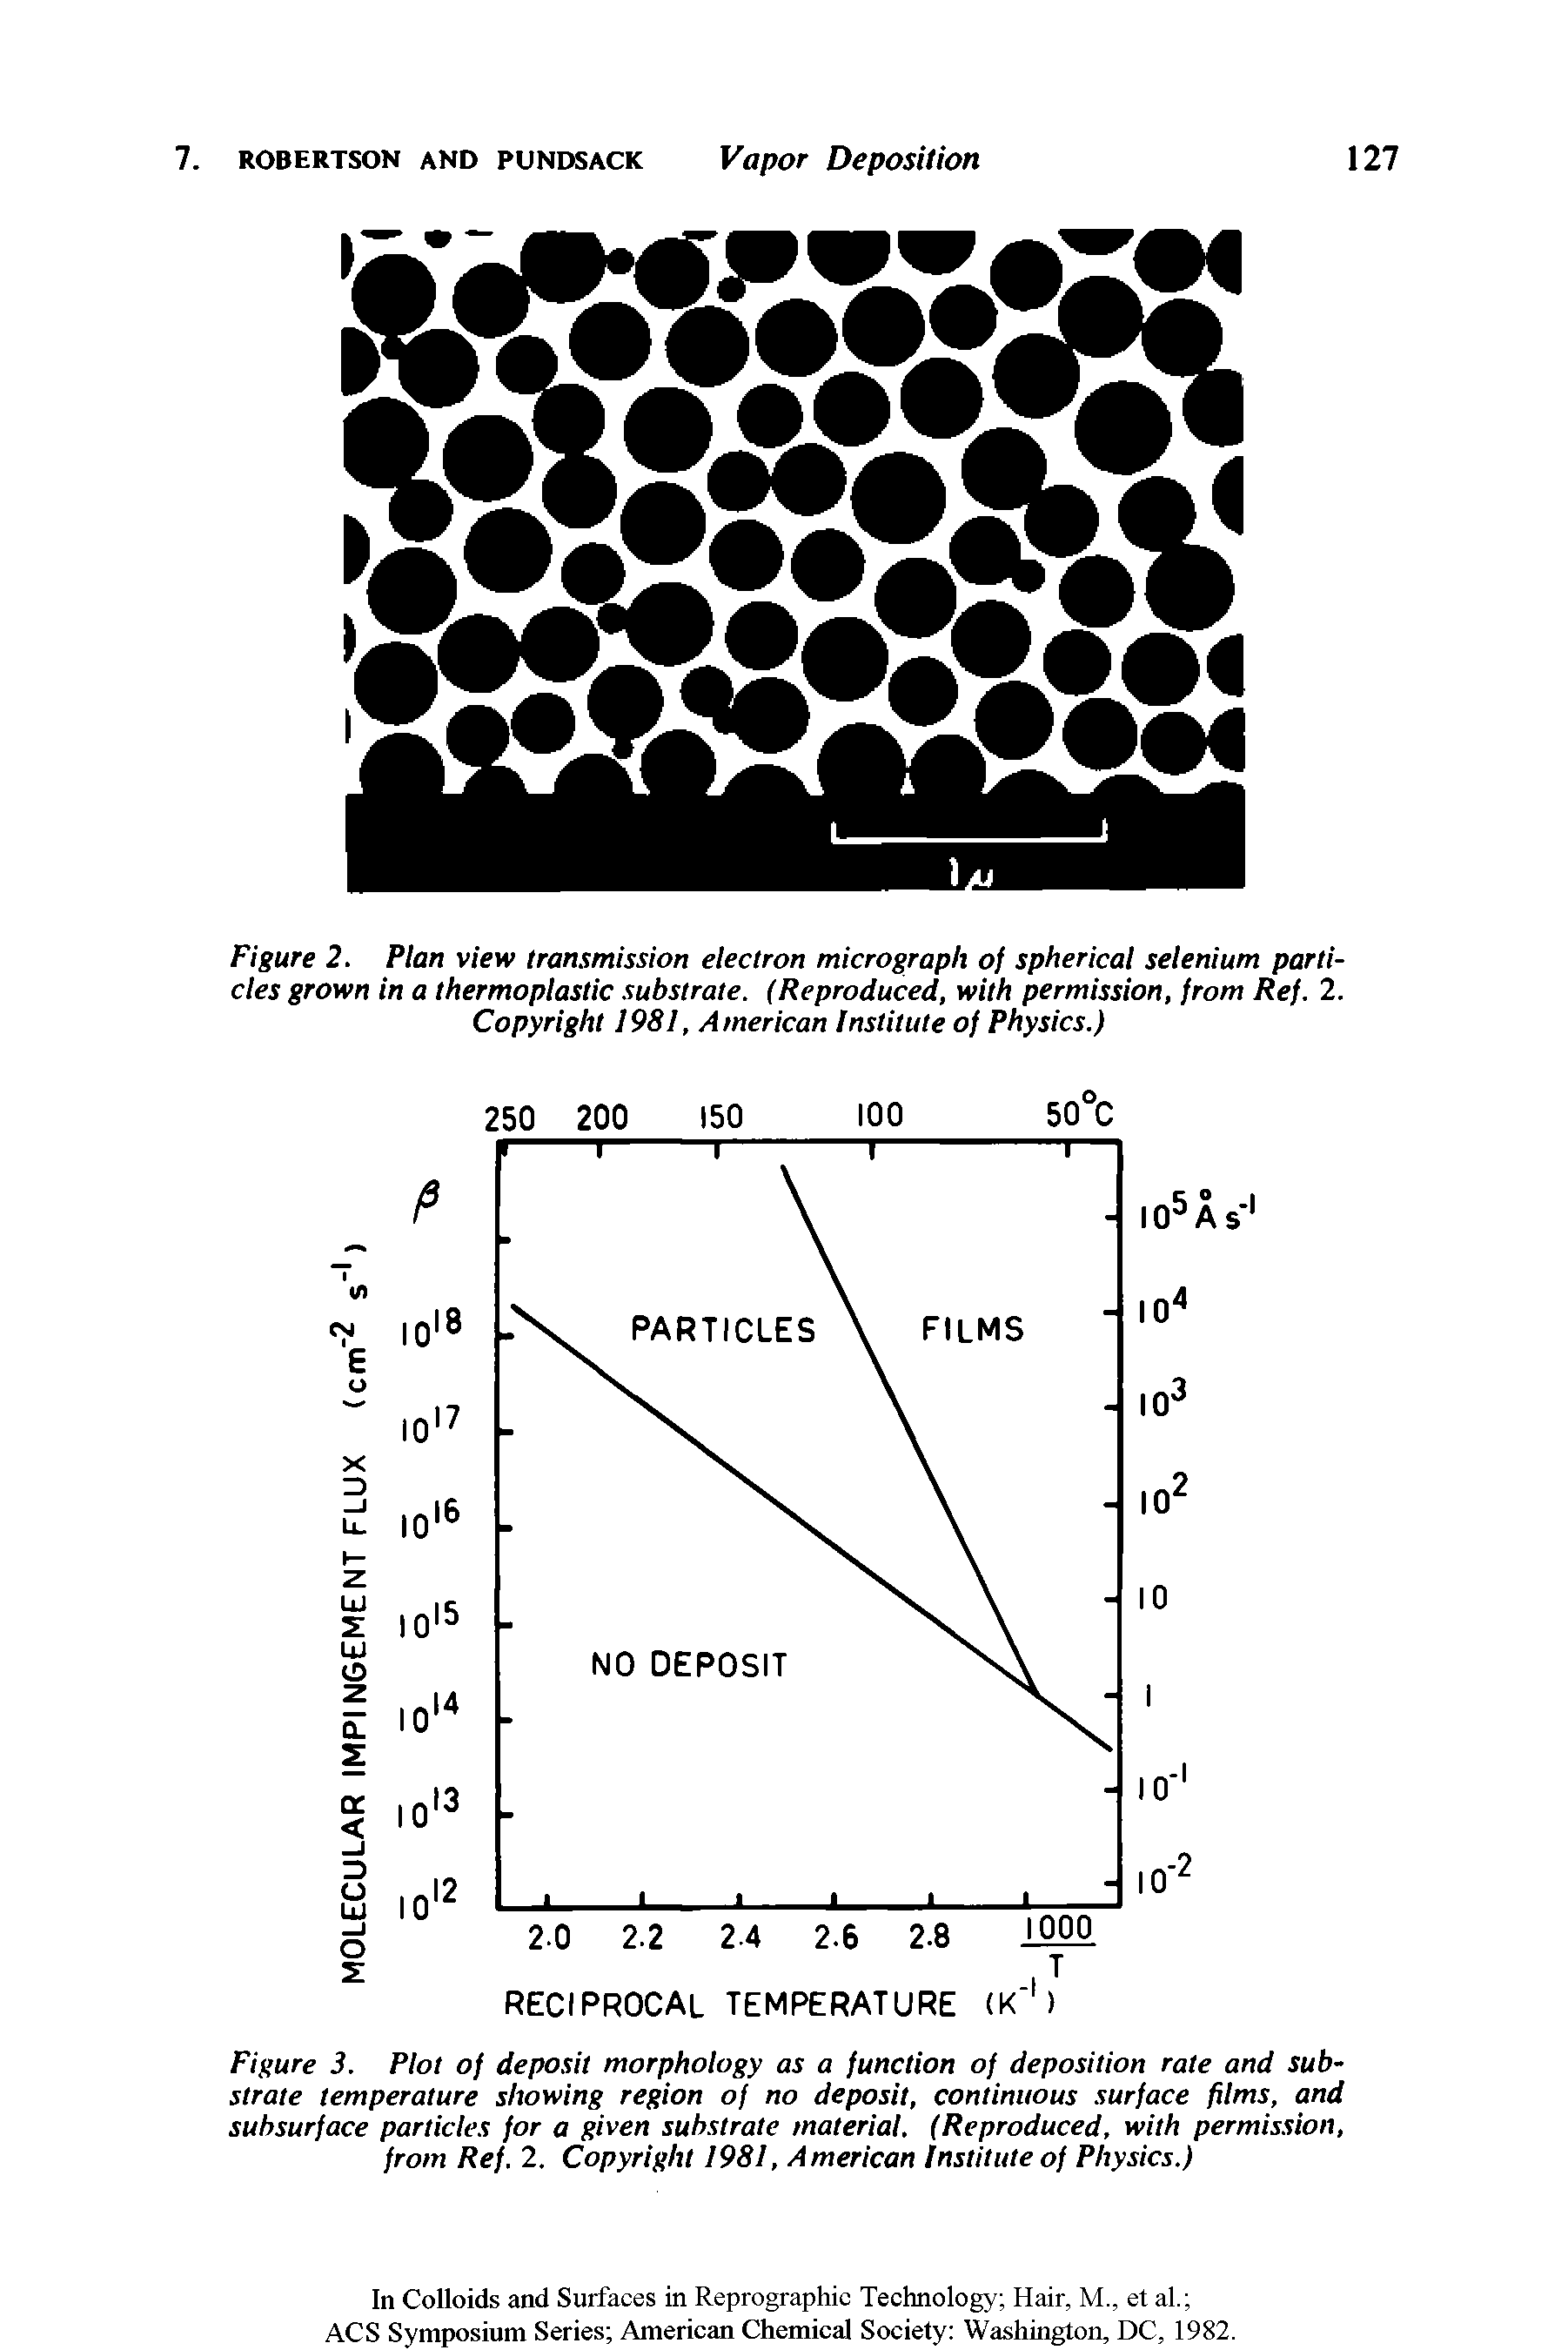 Figure 3. Plot of deposit morphology as a function of deposition rate and substrate temperature showing region of no deposit, continuous surface films, and subsurface particles for a given substrate material. (Reproduced, with permission, from Ref. 2. Copyright 1981, American Institute of Physics.)...